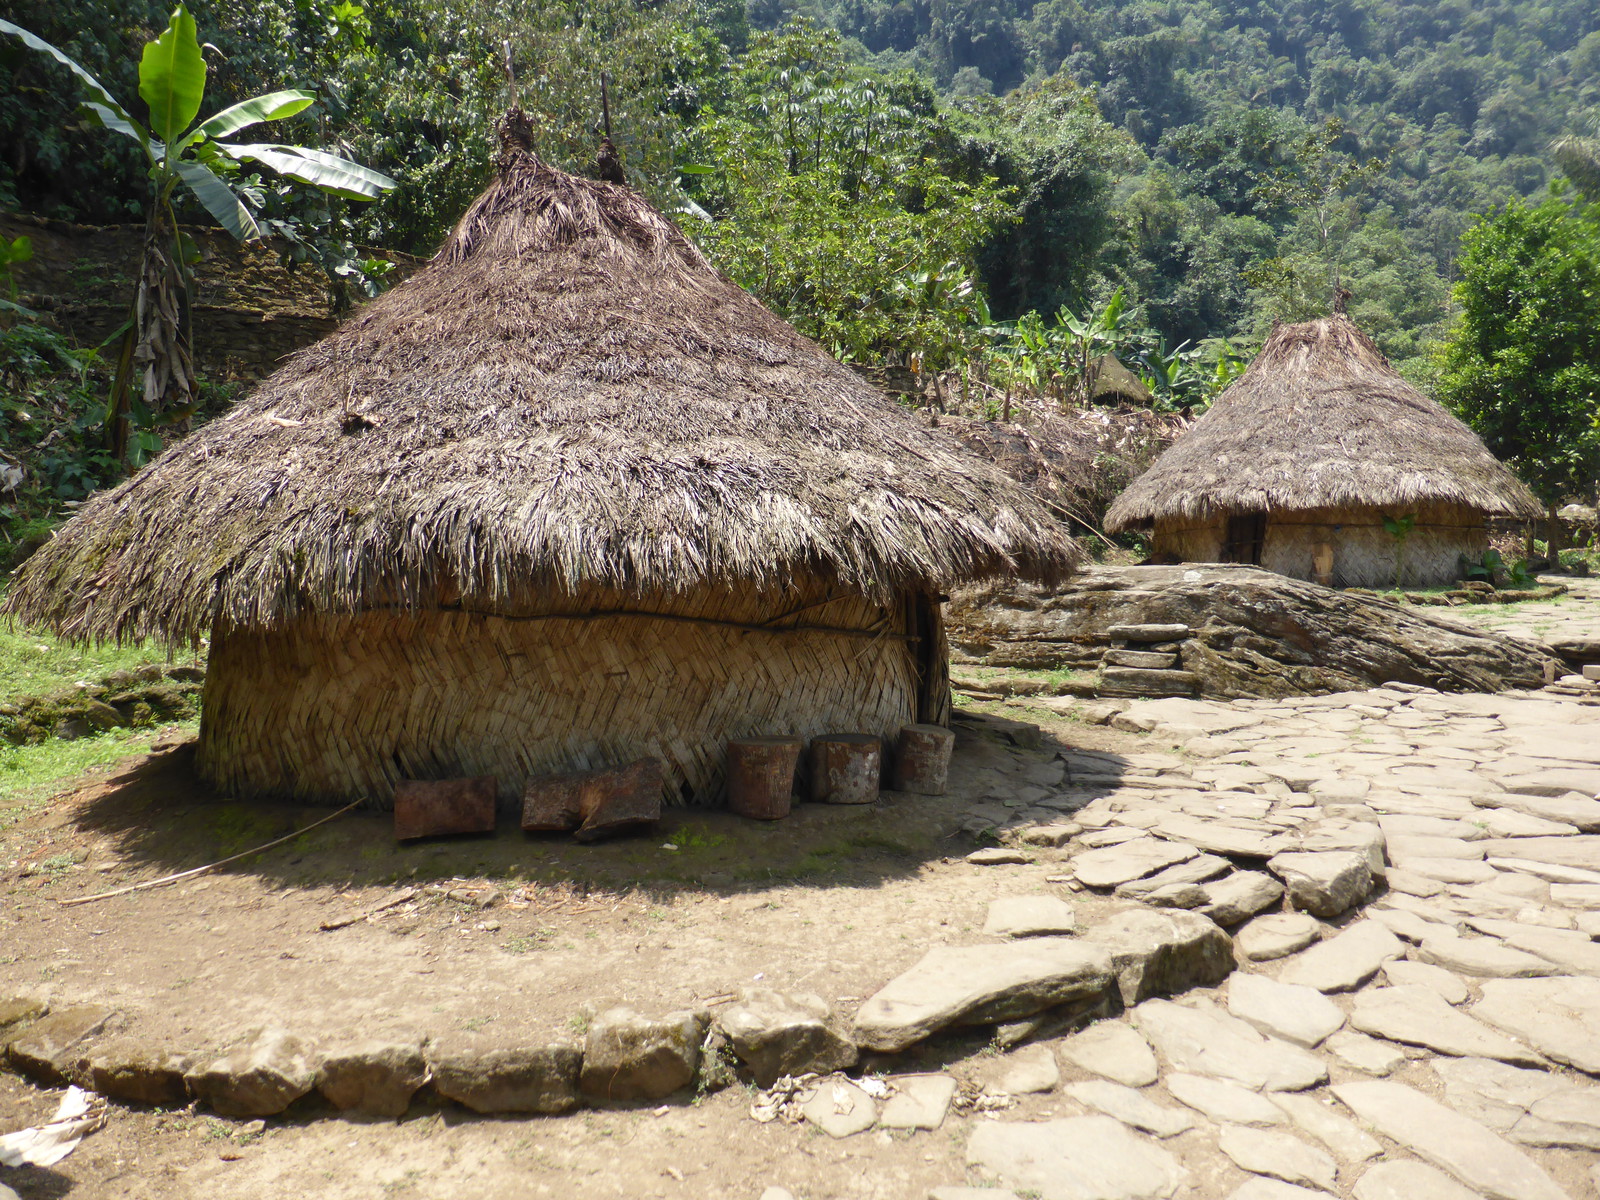 In its heyday, the circular platforms in the Lost City would have been covered in huts like these